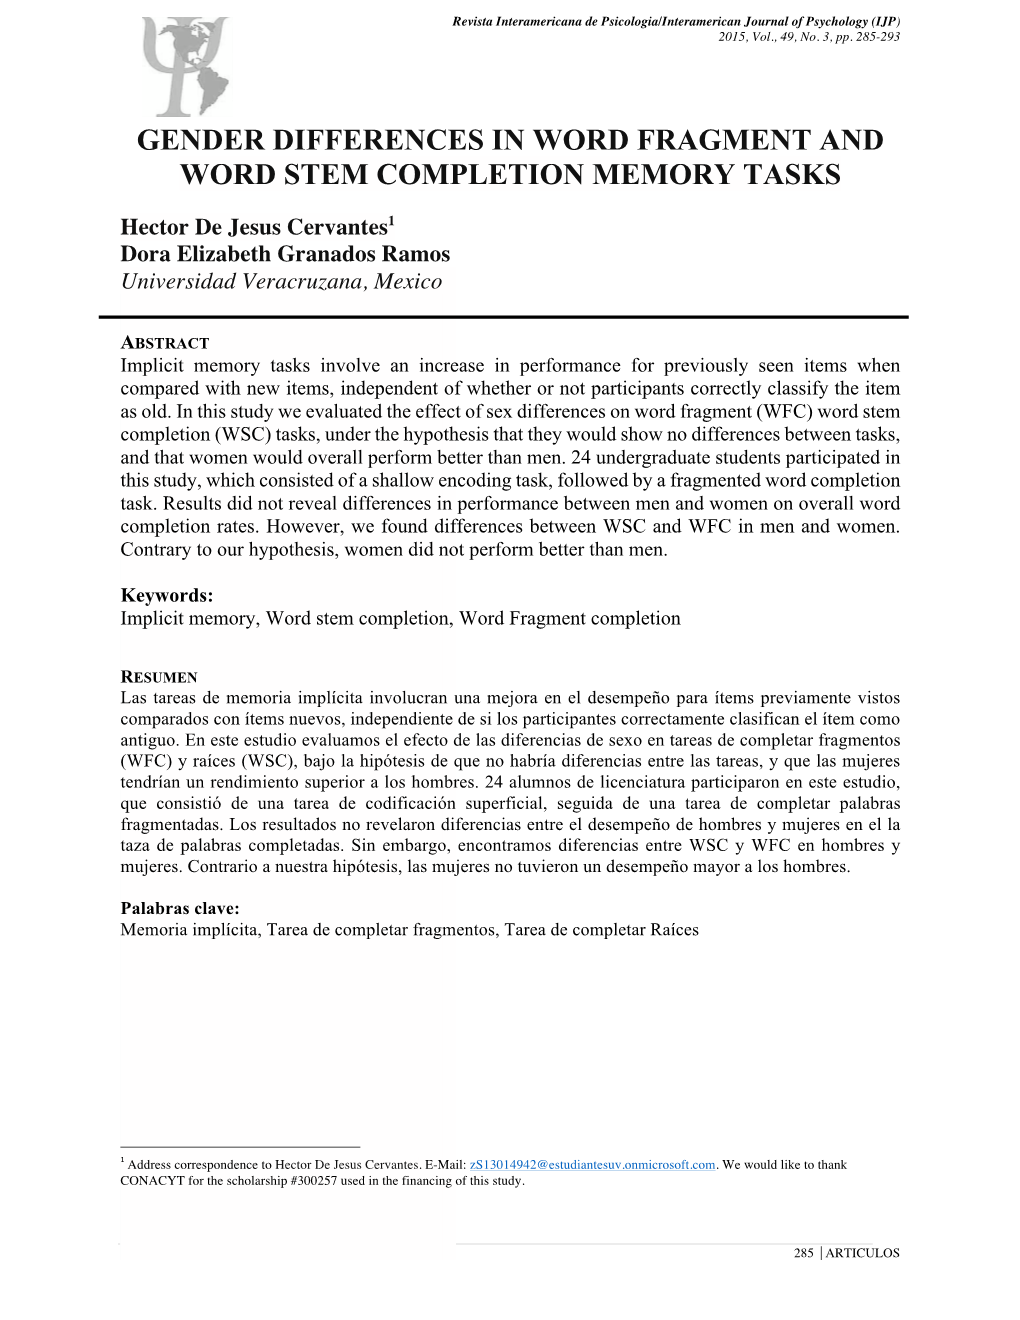 Gender Differences in Word Fragment and Word Stem Completion Memory Tasks